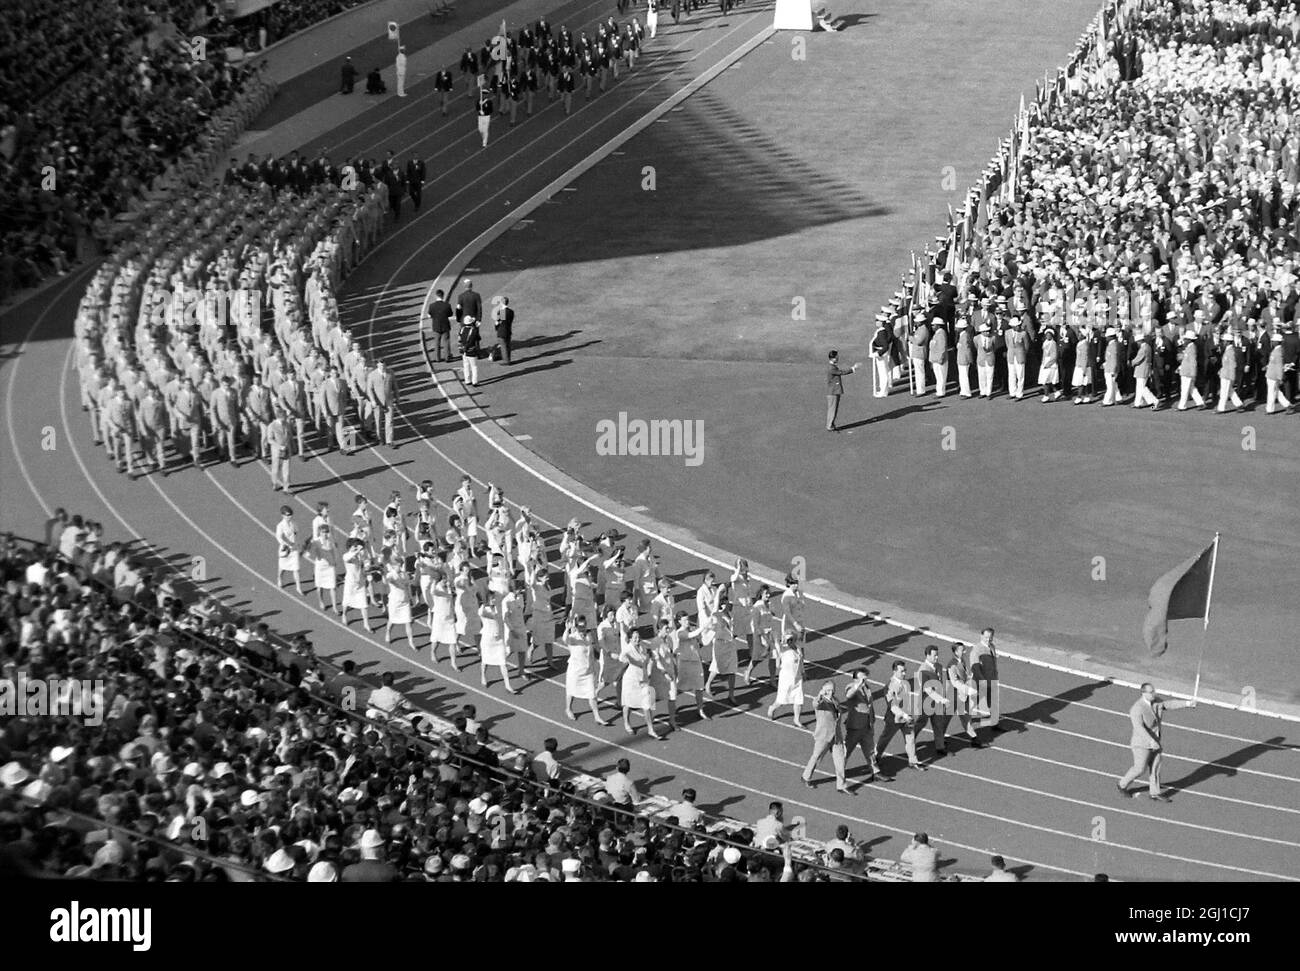 OLYMPICS, OLYMPIC SPORT GAMES - THE XVIII 18TH OLYMPIAD IN TOKYO, JAPAN - OPENING CEREMONIES WEIGHTLIFTER VLASOV HOLDS SOVIET FLAG  ;  11 OCTOBER 1964 Stock Photo